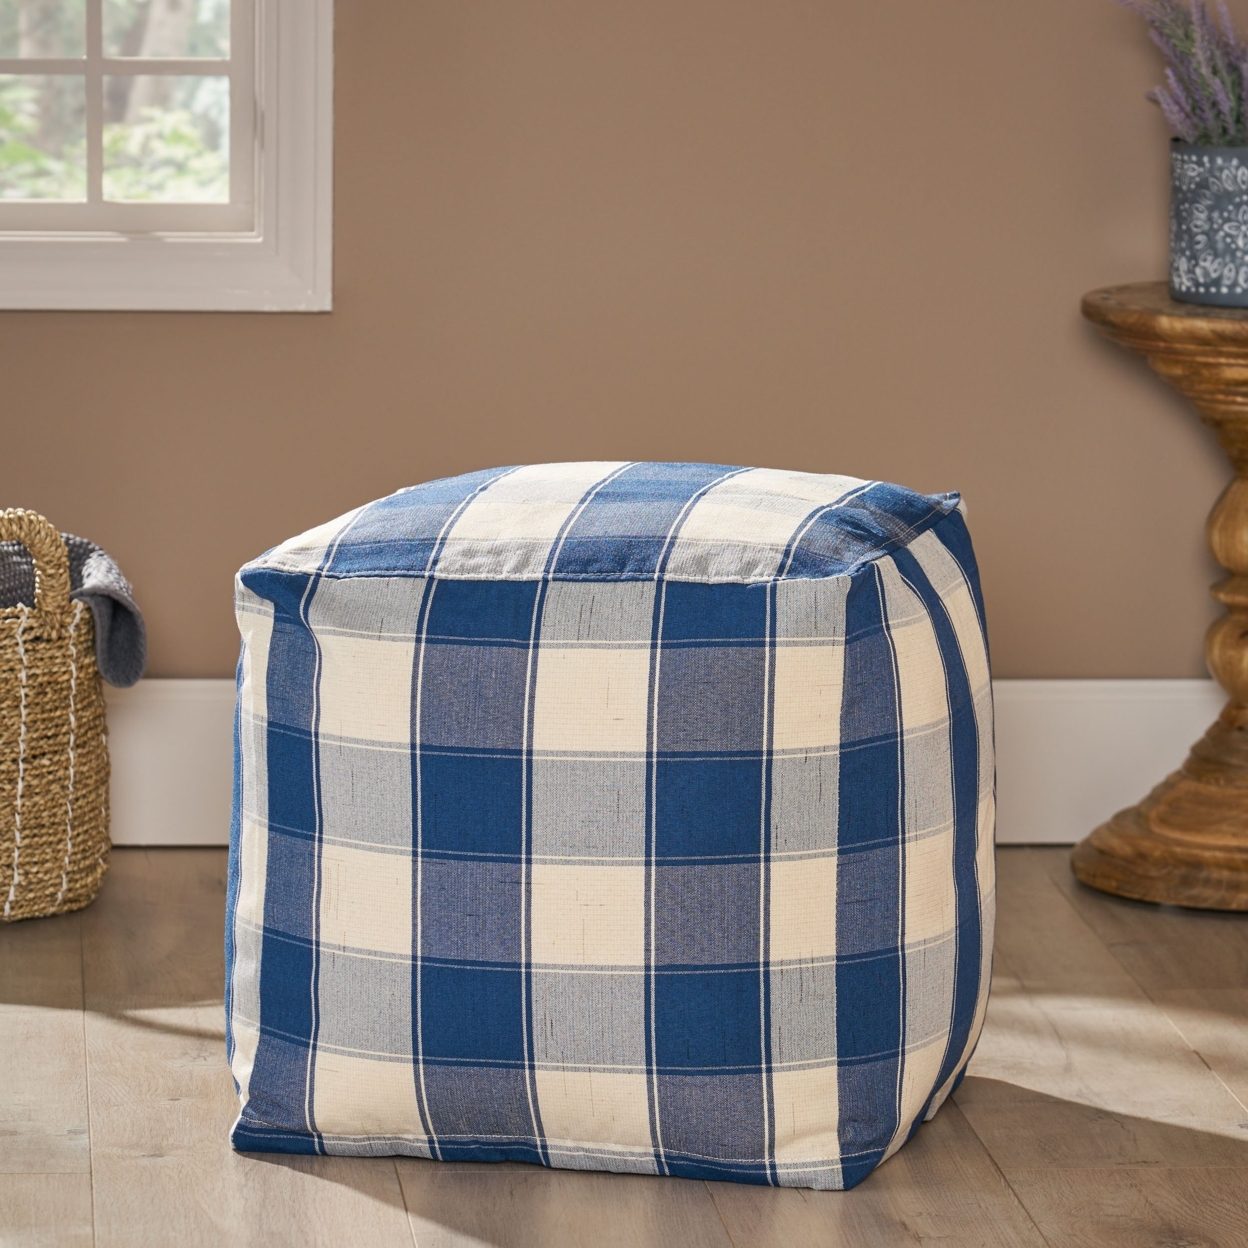 Prestage Modern Fabric Checkered Cube Pouf - Ivory/navy Blue